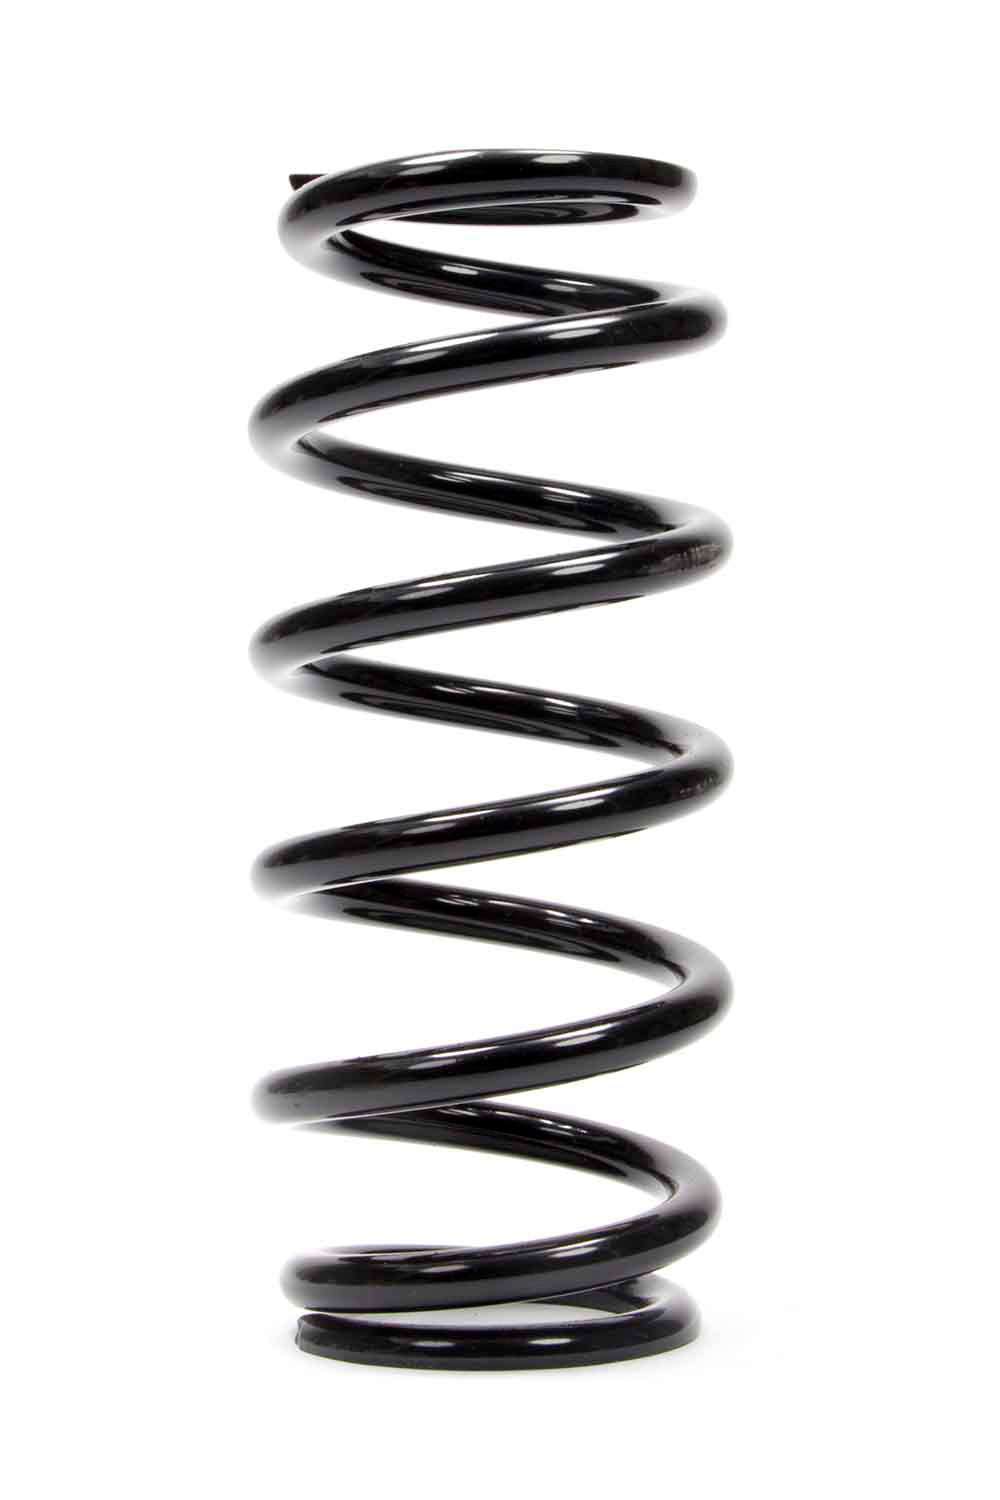 Integra Shocks 310-2510-525DLC Coil Spring, DLC Series, Coil-Over, 2.625 in ID, 10.000 in Length, 525 lb/in Spring Rate, Steel, Black Powder Coat, Each